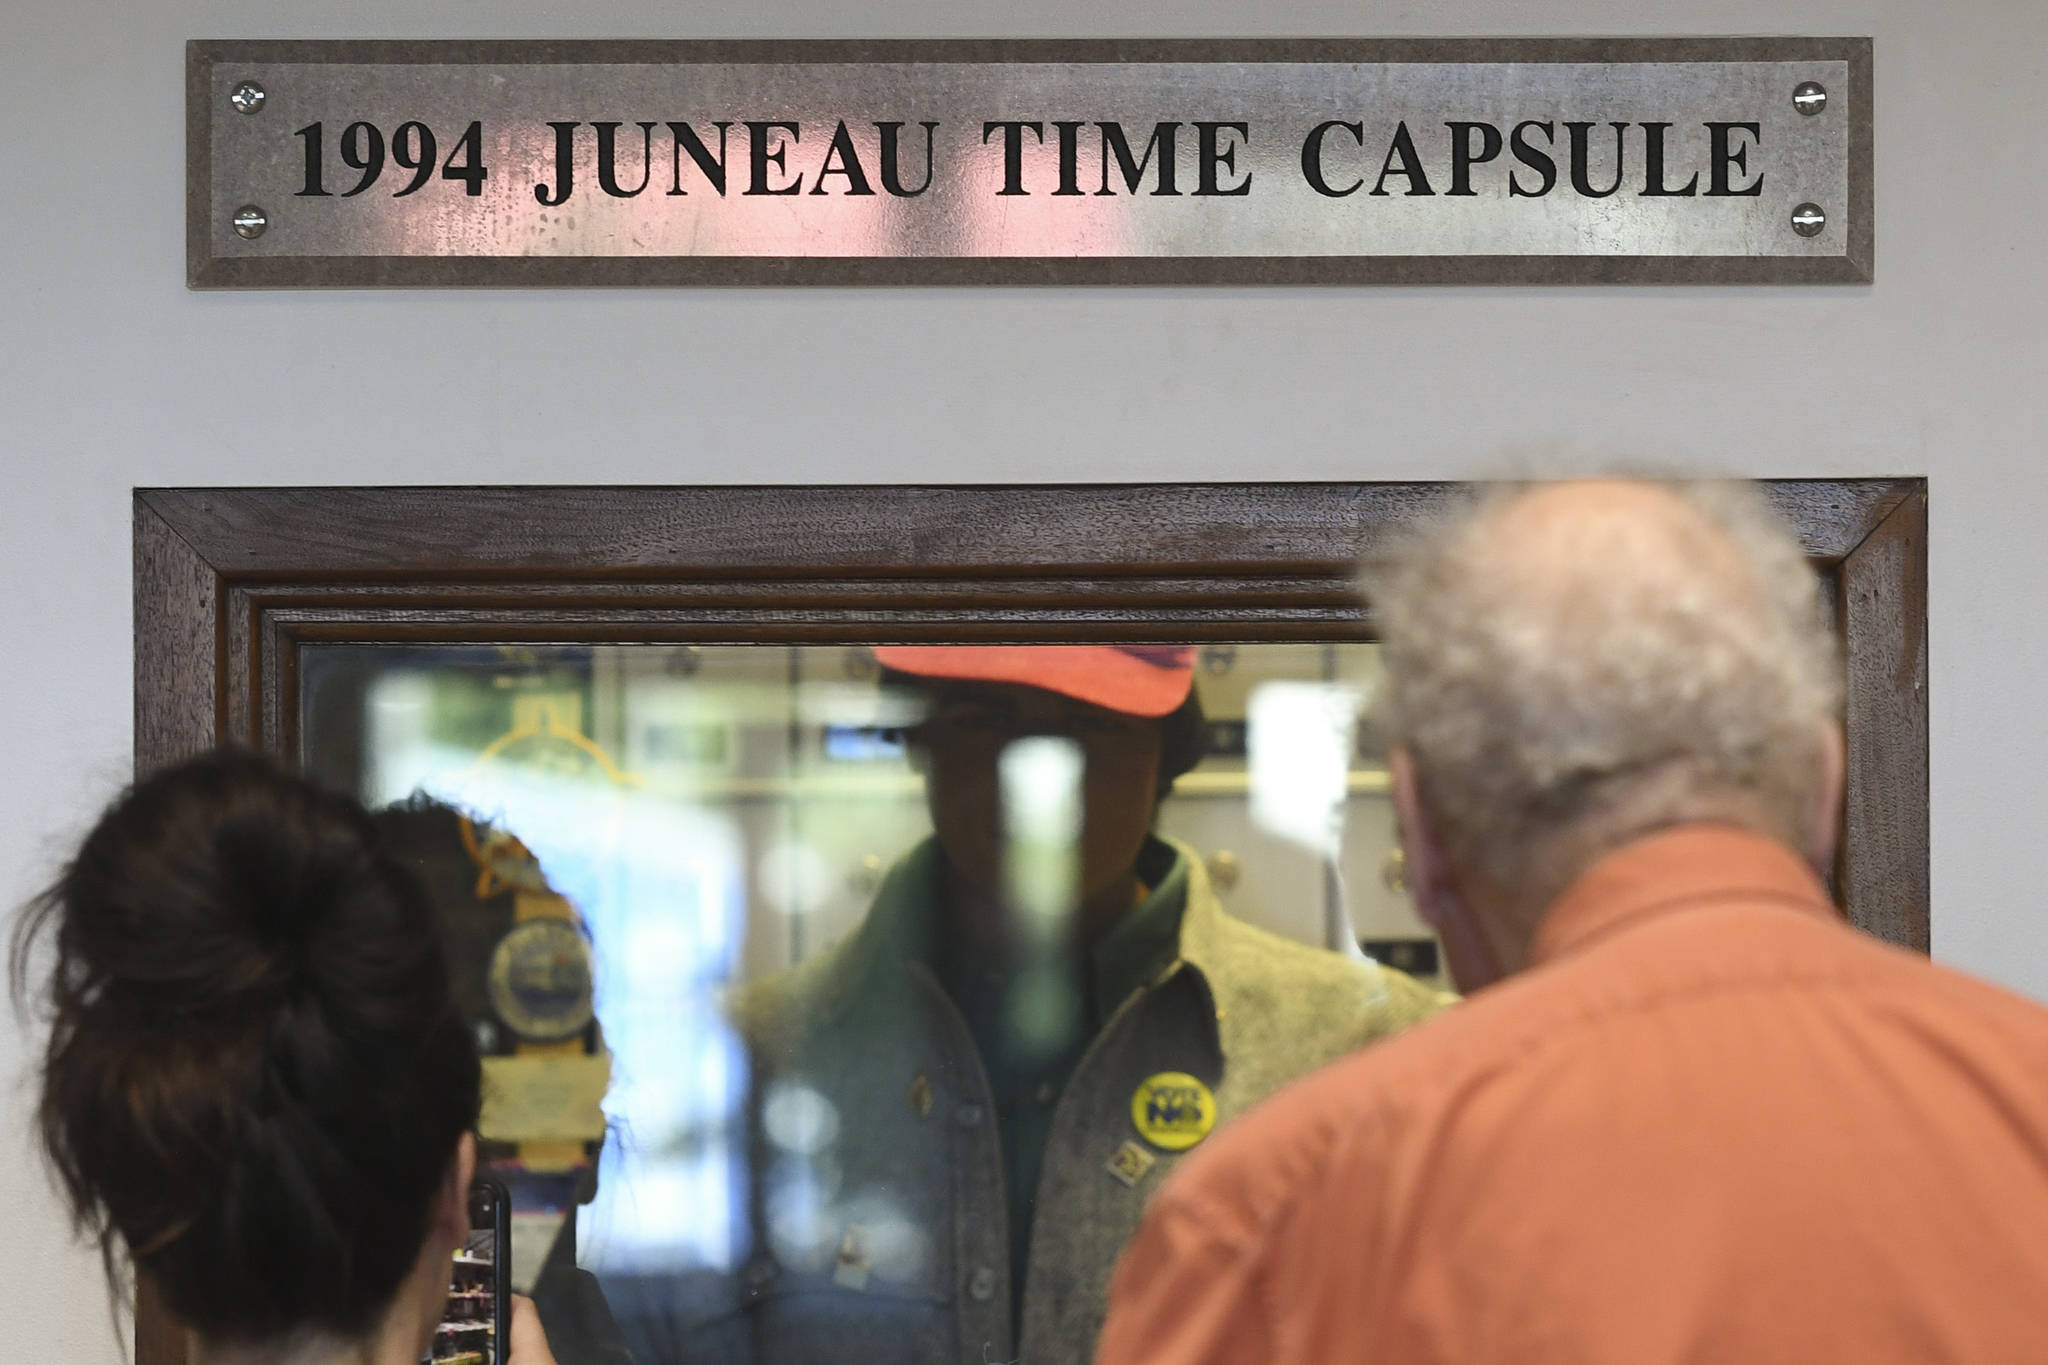 The 1994 Juneau Time Capsule at the Hurff Ackerman Saunders Federal Building in Juneau on Friday, Aug. 9, 2019. (Michael Penn | Juneau Empire)